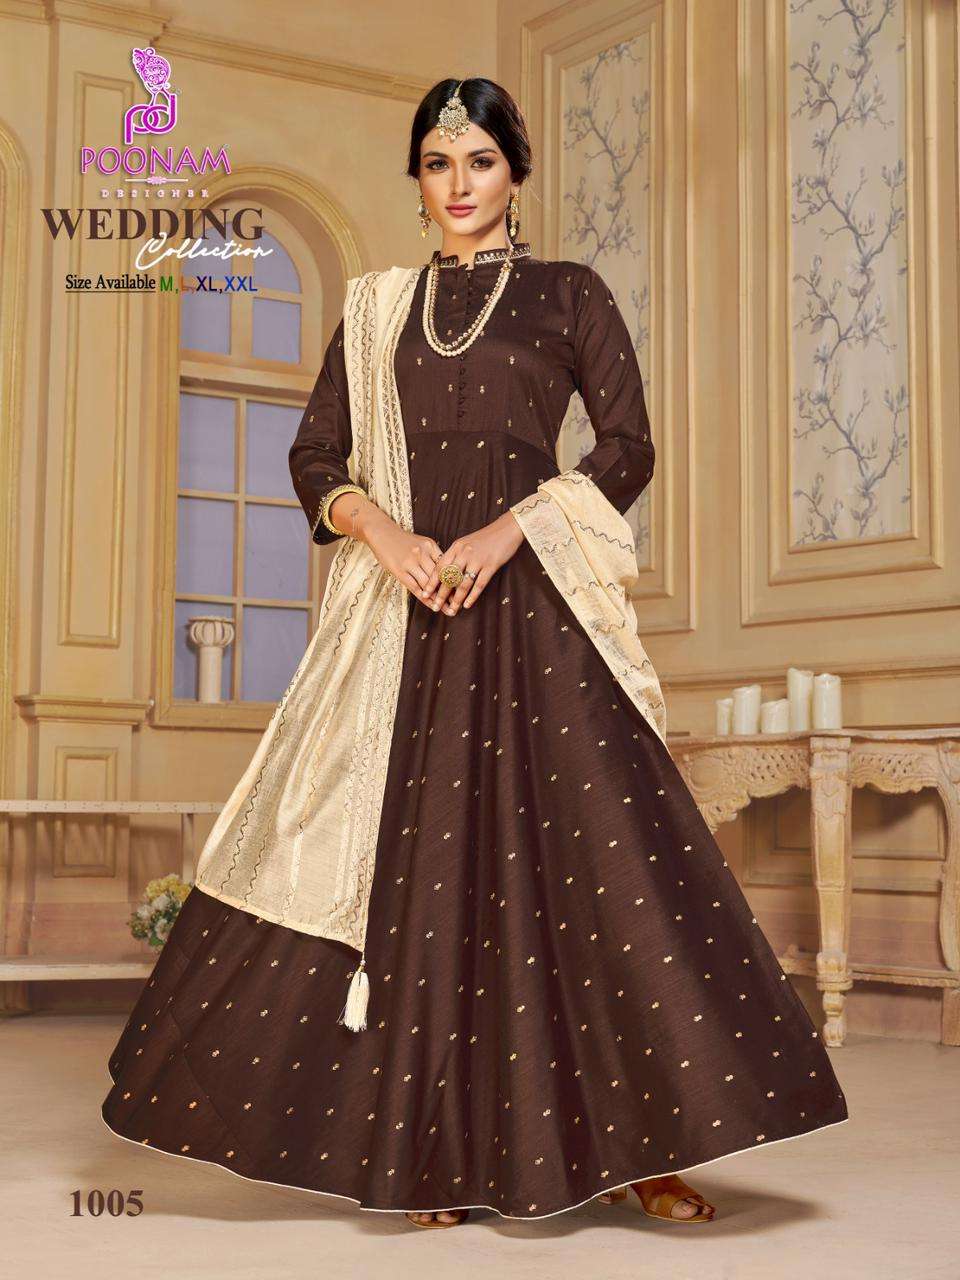 poonam designer wedding collection 1001-1006 series wedding seasons special designer gown with dupatta new catalogue 